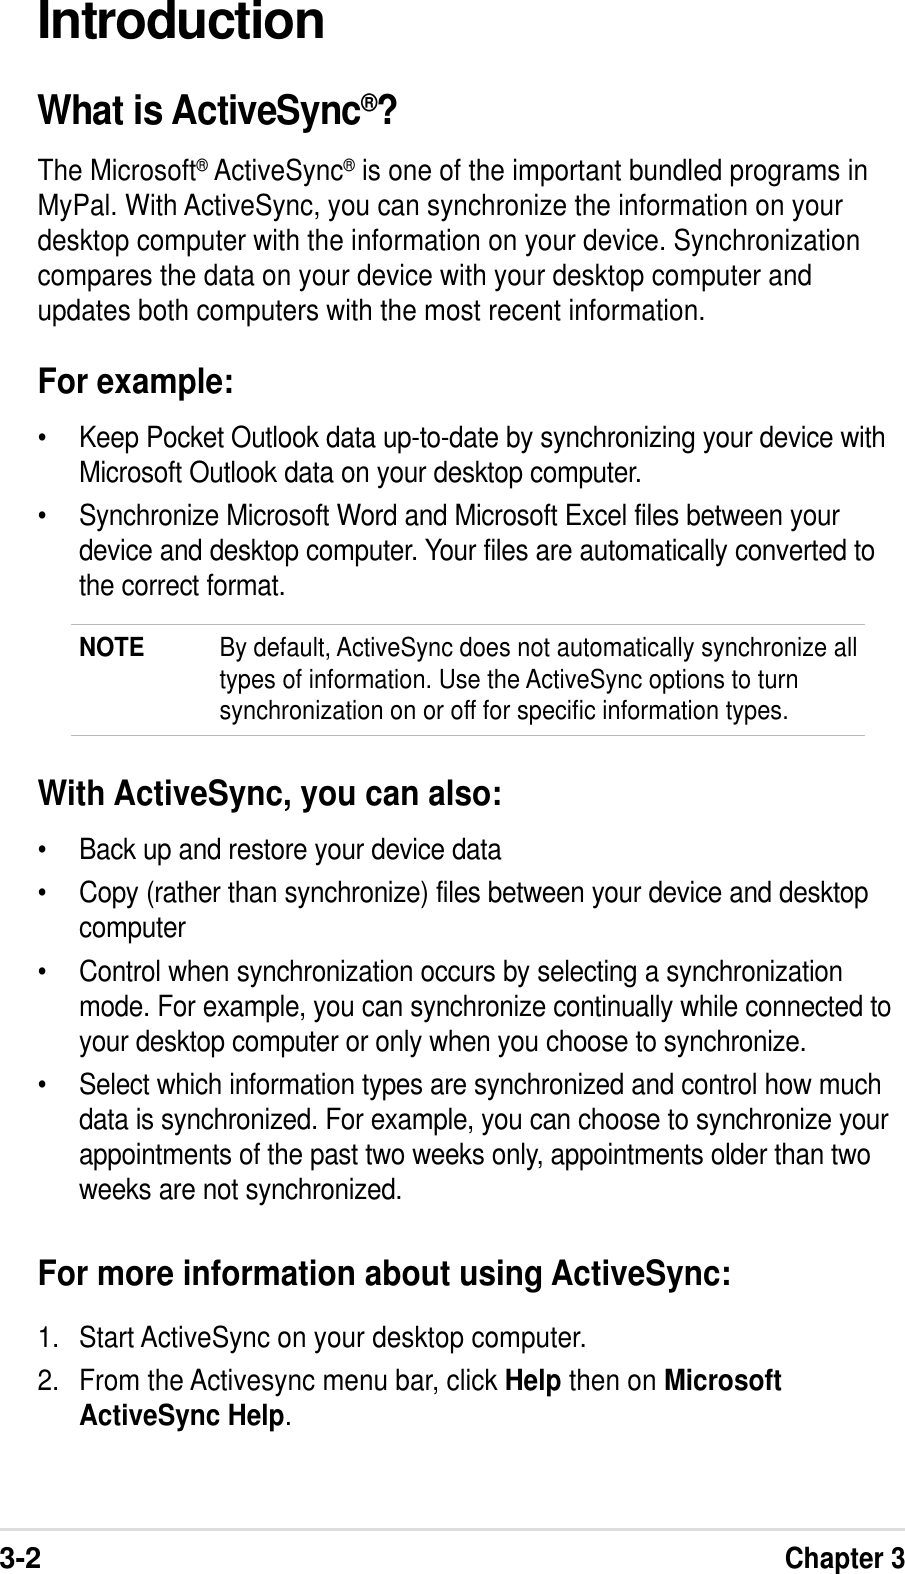 3-2Chapter 3IntroductionWhat is ActiveSync®?The Microsoft® ActiveSync® is one of the important bundled programs inMyPal. With ActiveSync, you can synchronize the information on yourdesktop computer with the information on your device. Synchronizationcompares the data on your device with your desktop computer andupdates both computers with the most recent information.For example:•Keep Pocket Outlook data up-to-date by synchronizing your device withMicrosoft Outlook data on your desktop computer.•Synchronize Microsoft Word and Microsoft Excel files between yourdevice and desktop computer. Your files are automatically converted tothe correct format.NOTE By default, ActiveSync does not automatically synchronize alltypes of information. Use the ActiveSync options to turnsynchronization on or off for specific information types.With ActiveSync, you can also:•Back up and restore your device data•Copy (rather than synchronize) files between your device and desktopcomputer•Control when synchronization occurs by selecting a synchronizationmode. For example, you can synchronize continually while connected toyour desktop computer or only when you choose to synchronize.•Select which information types are synchronized and control how muchdata is synchronized. For example, you can choose to synchronize yourappointments of the past two weeks only, appointments older than twoweeks are not synchronized.For more information about using ActiveSync:1. Start ActiveSync on your desktop computer.2. From the Activesync menu bar, click Help then on MicrosoftActiveSync Help.